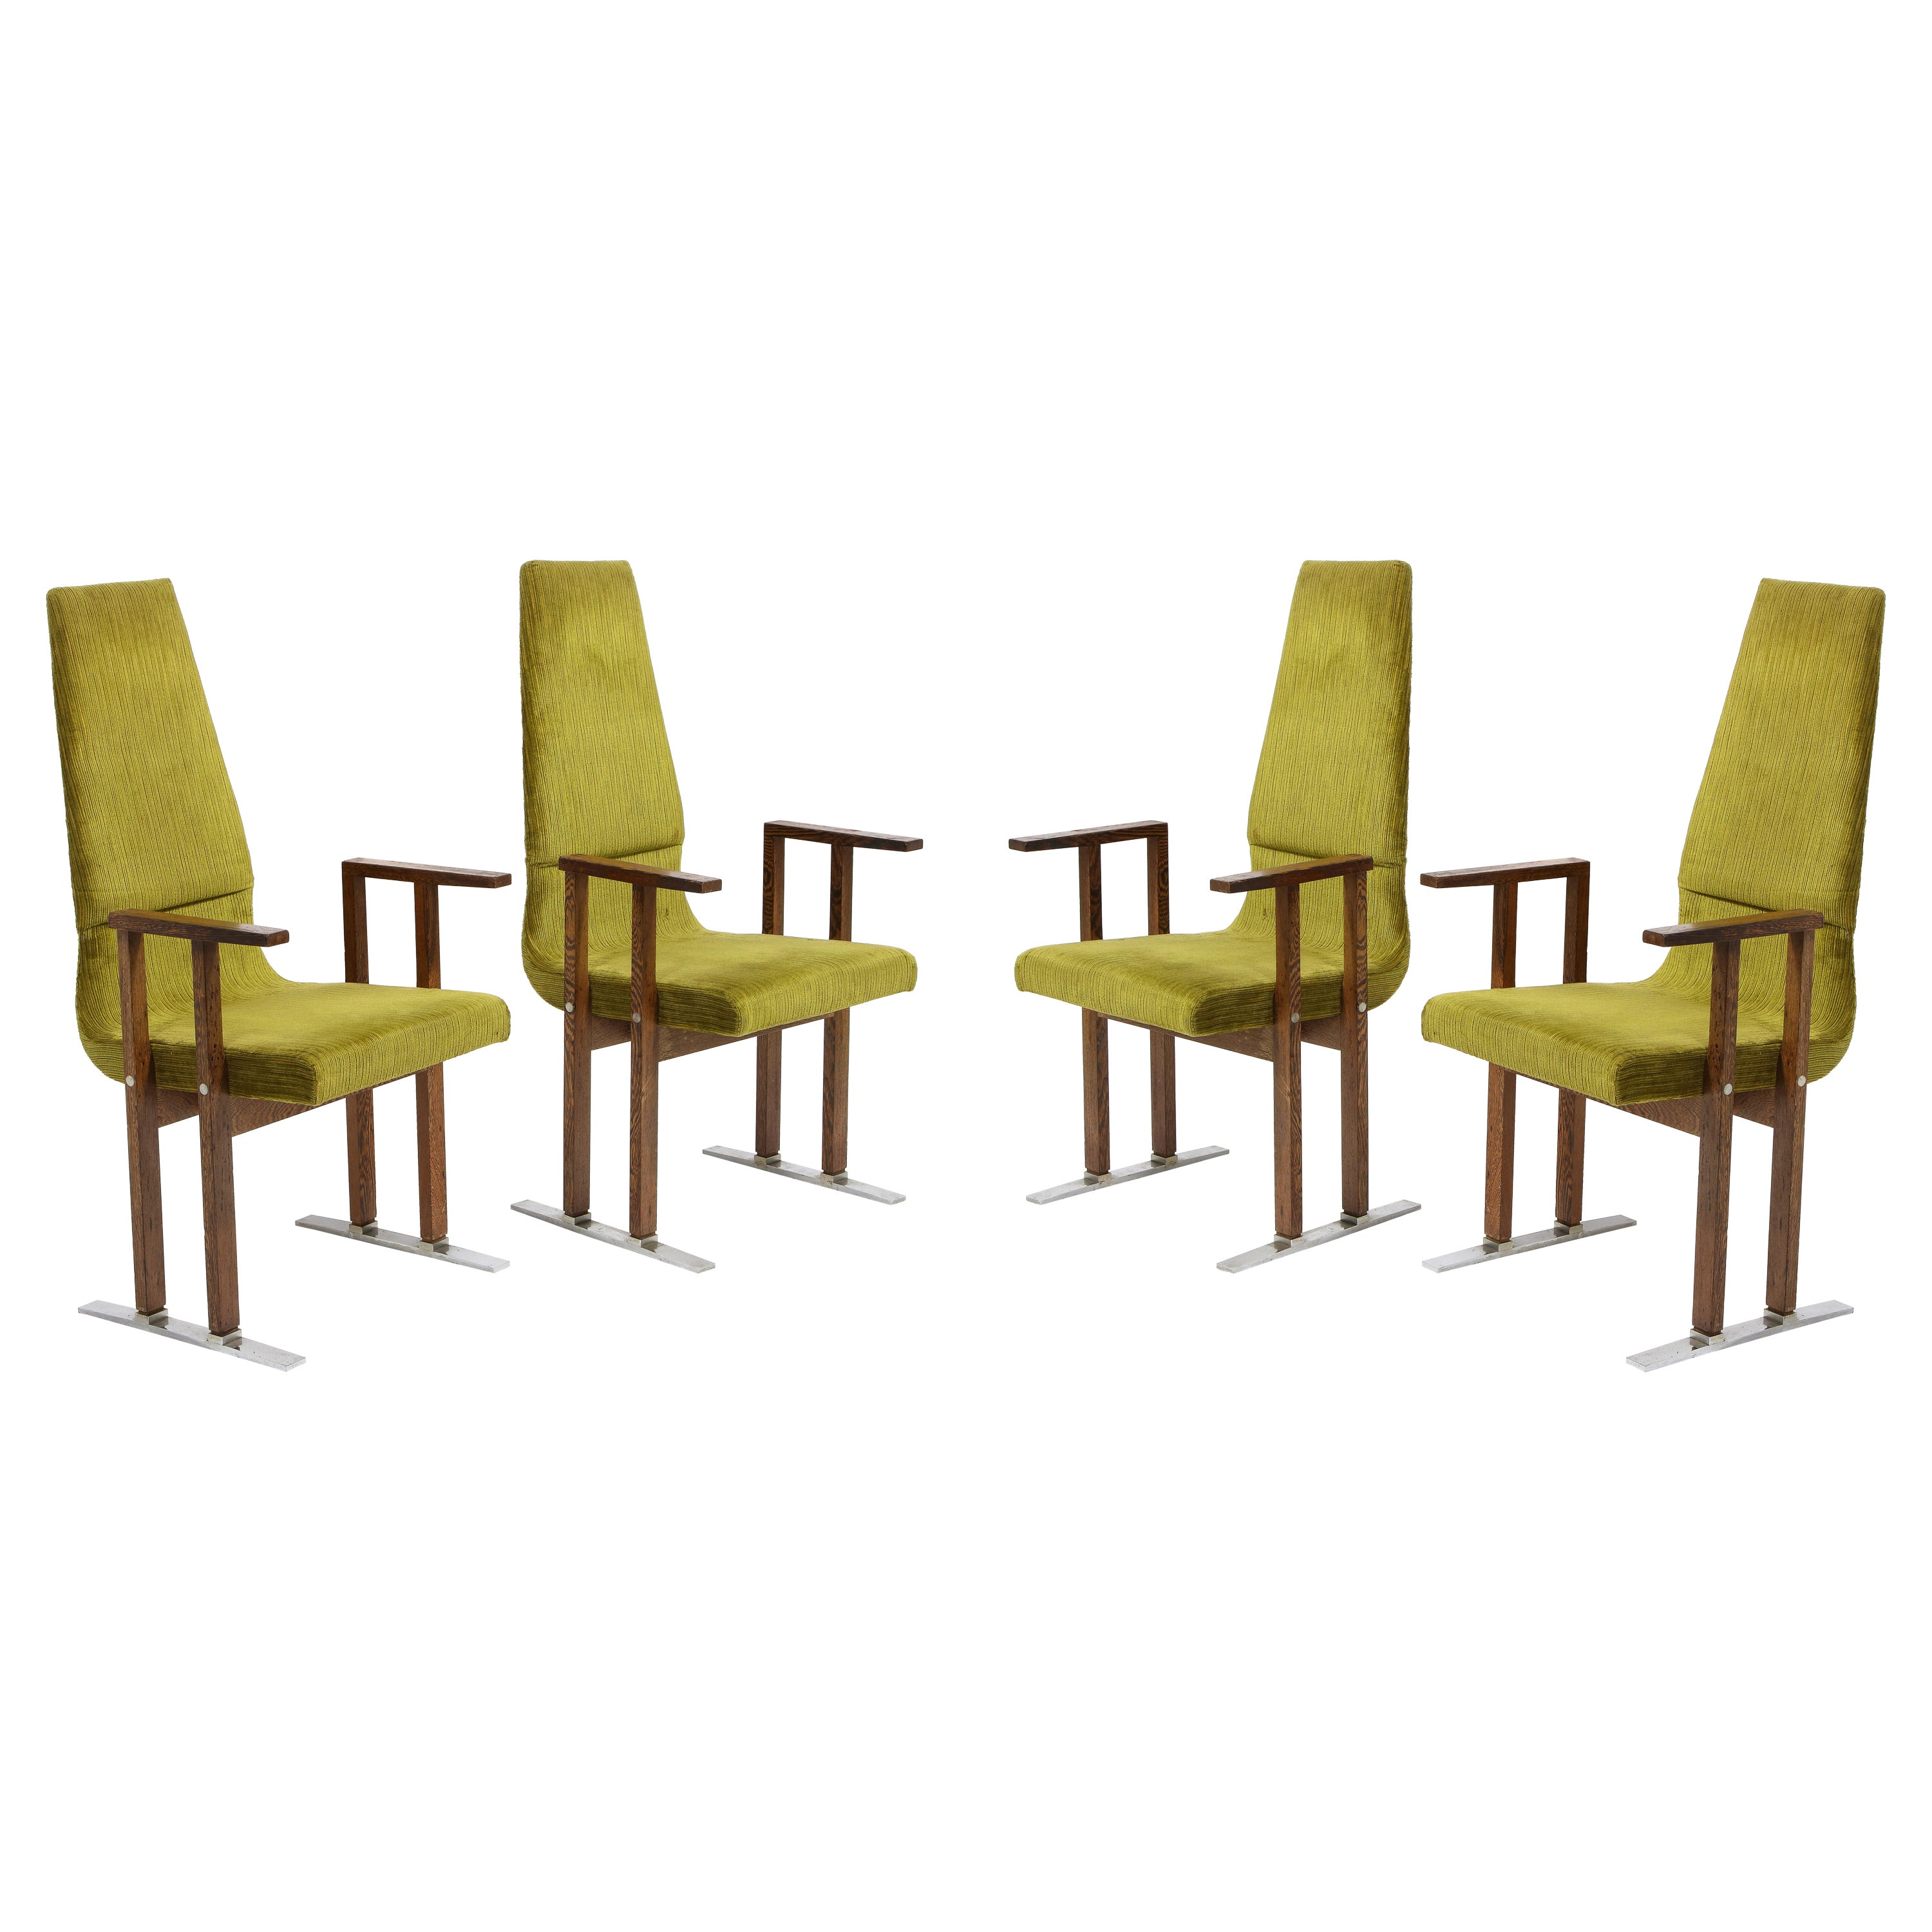 Set of Four Palmwood Armchairs, Italy, 1970s